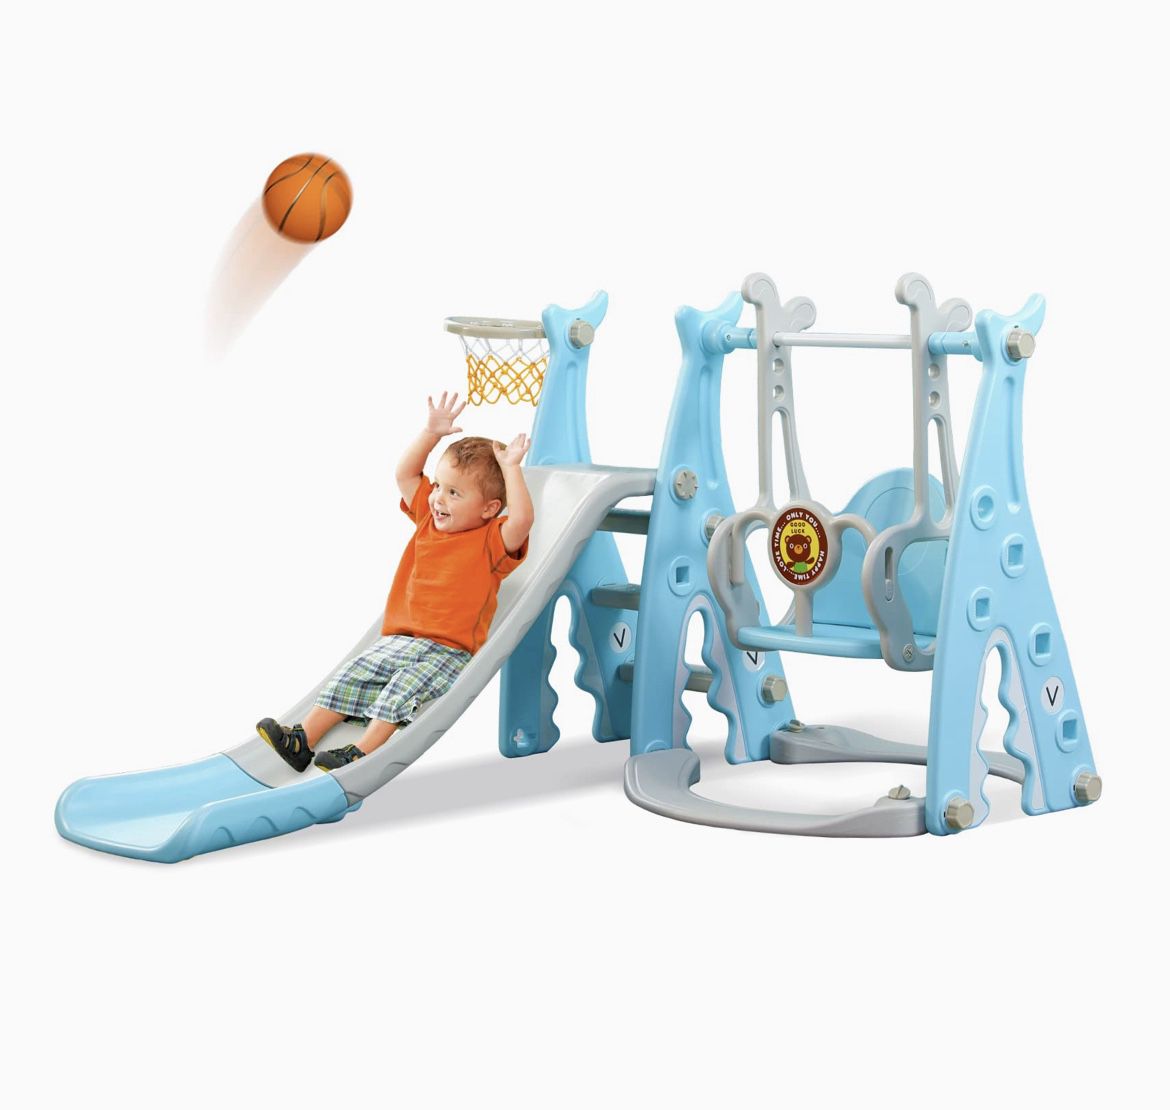 Toddlers Slide and Swing Set 4 in 1 Kids Freestanding Climber Slide Playset for Boys Girls with Basketball Hoop Extra Long Slide Easy Set Up Baby Play